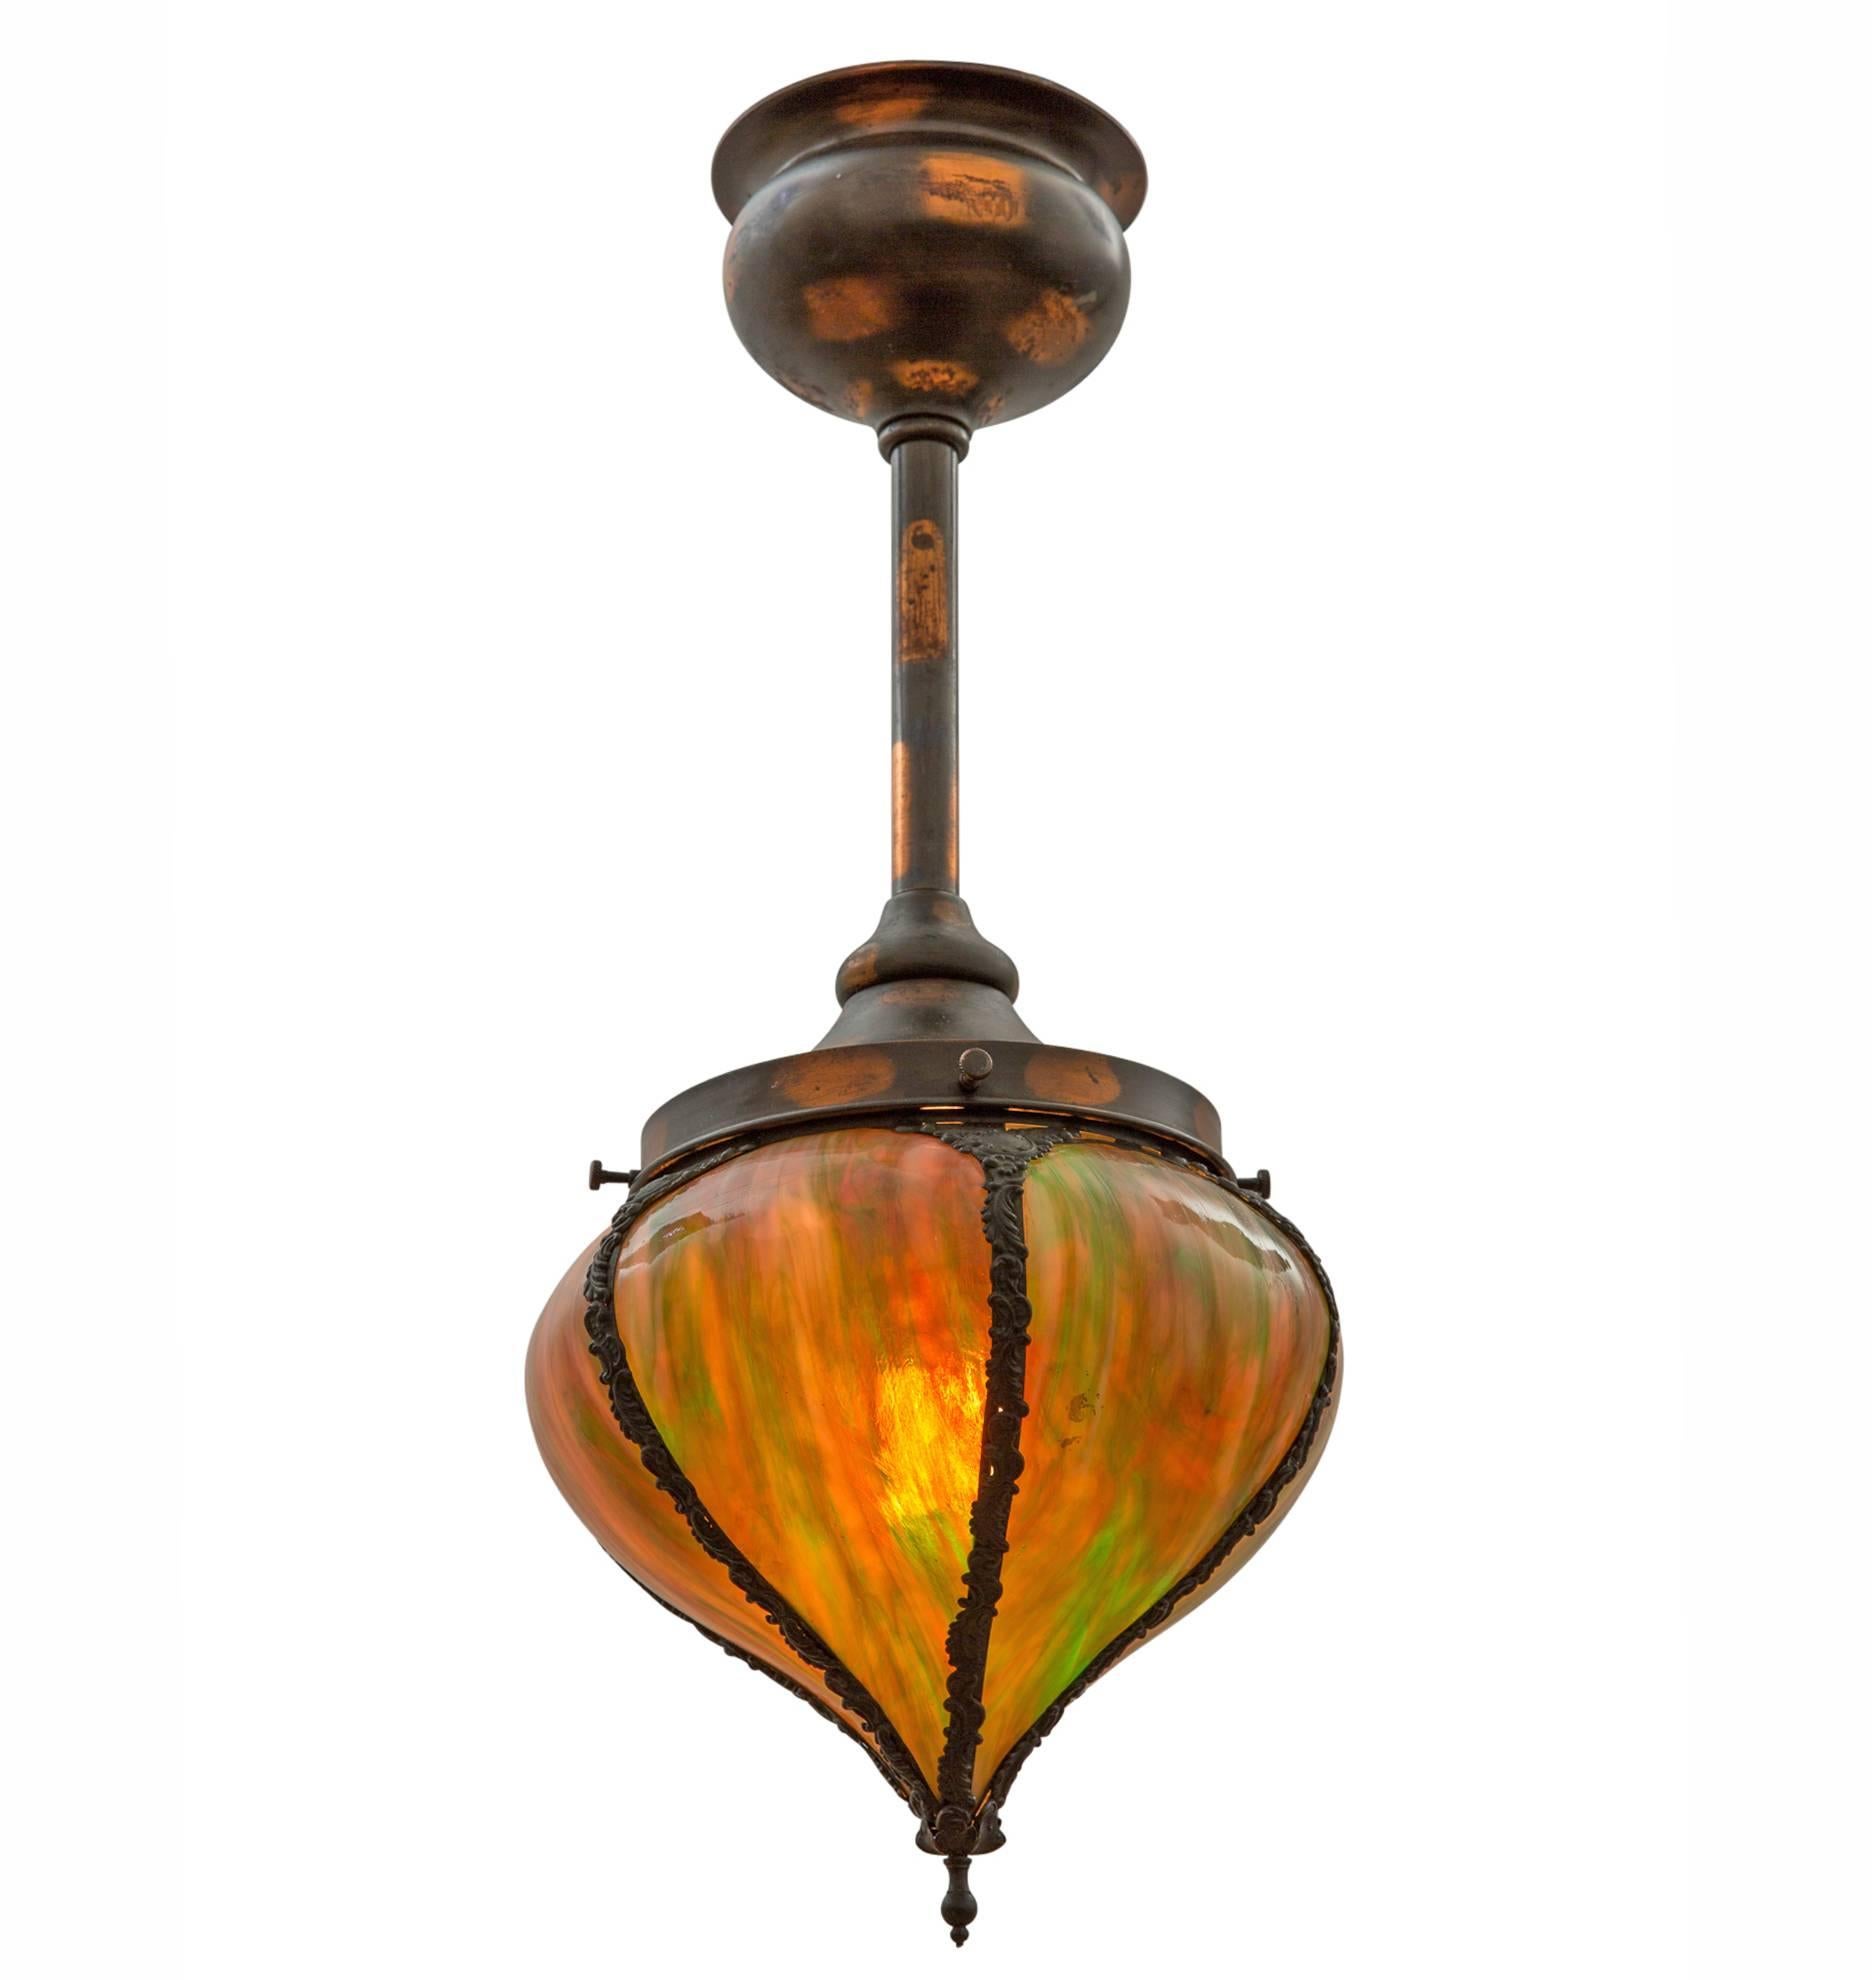 A rare jewel: an early electric Victorian pendant, complete with japanned copper finish and an enormous five-paneled art glass shade. The shade, which bulges like an onion dome, is adorned with brass straps, cast with incredibly ornate patterns.